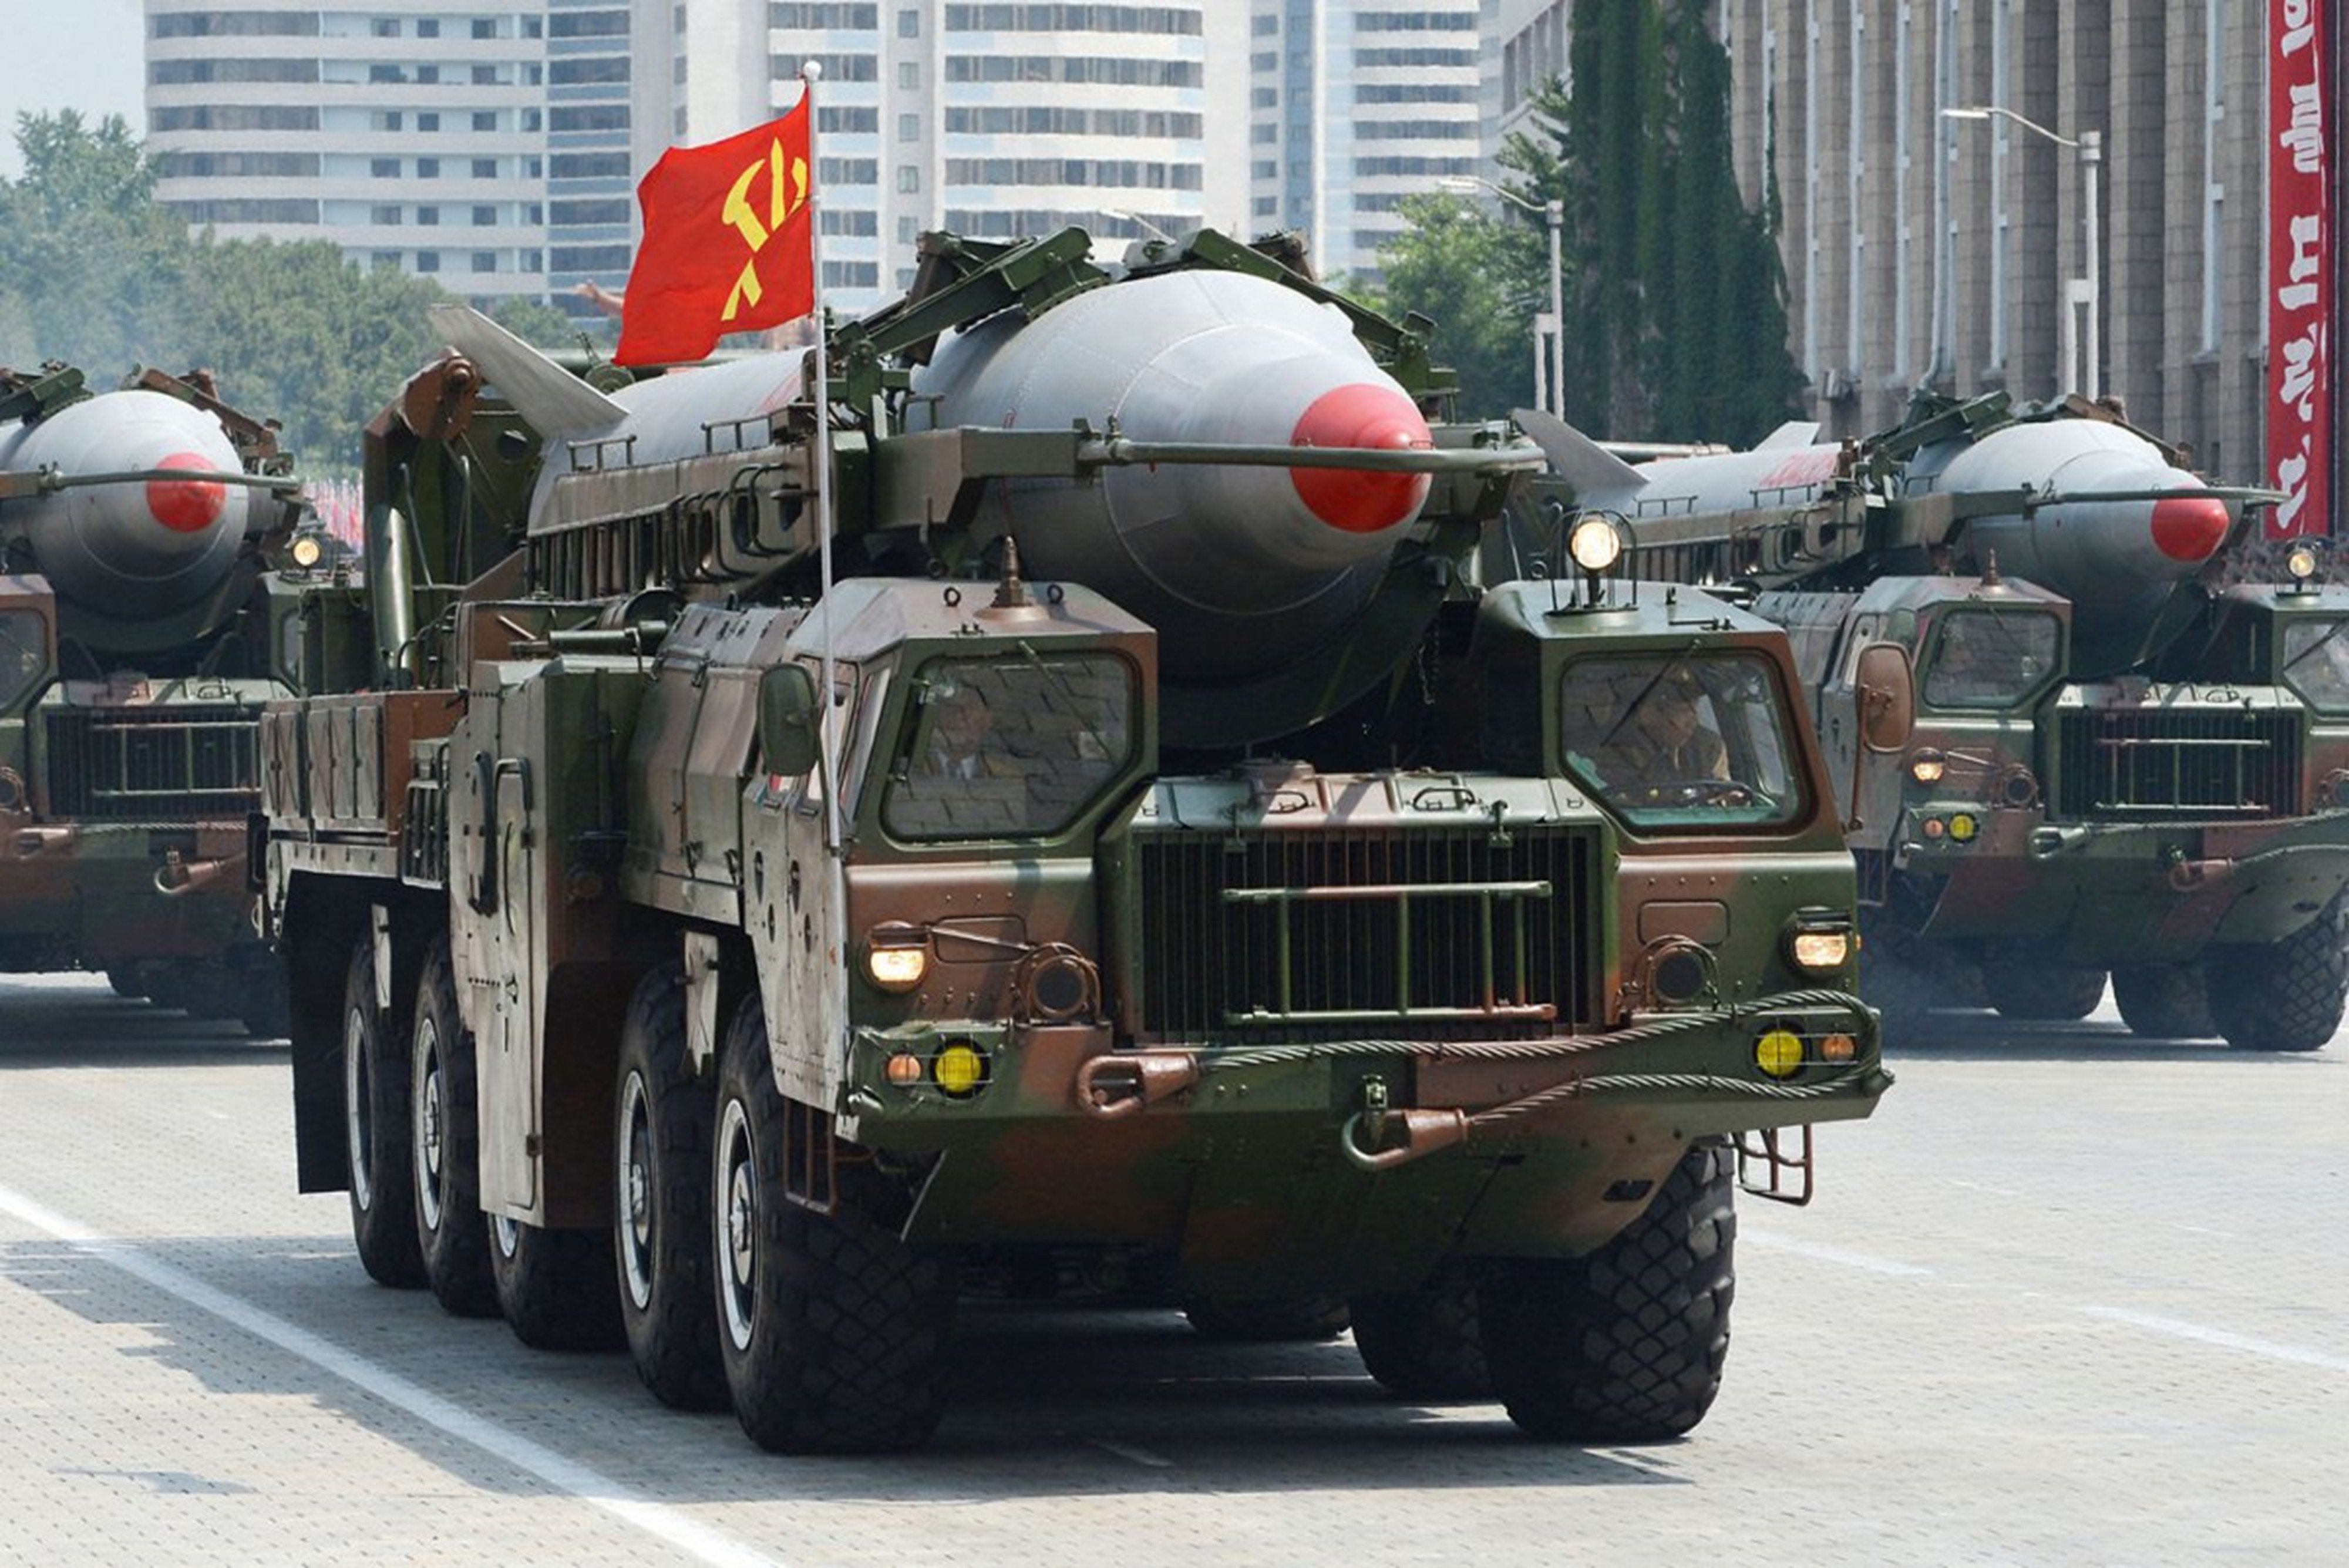 missile, North korea, Vehicle, Truck, Military, Parade, Wepons,  6 Wallpaper